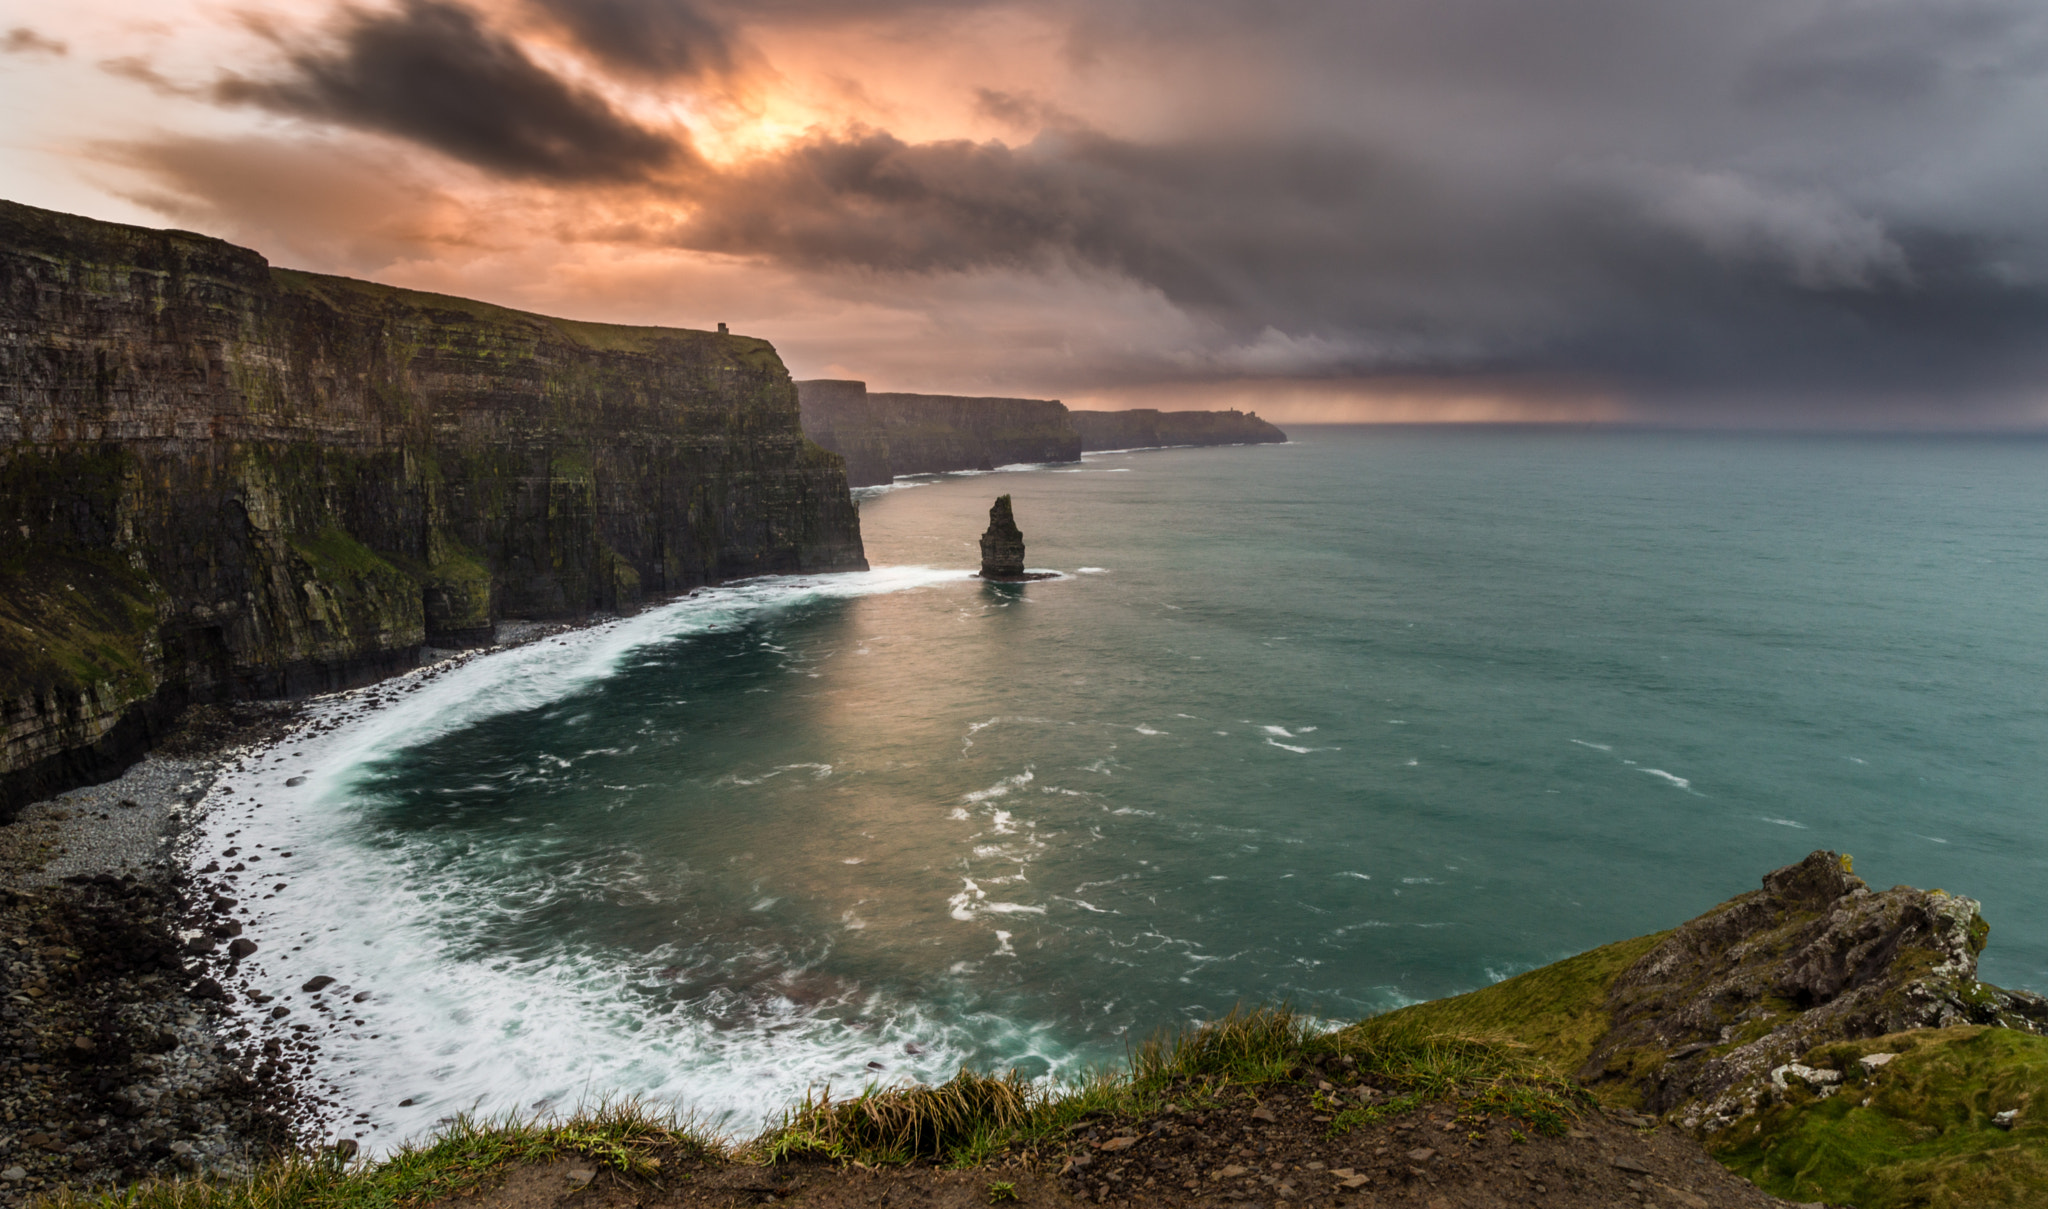 Sony a99 II sample photo. Sunset over the cliffs of moher photography